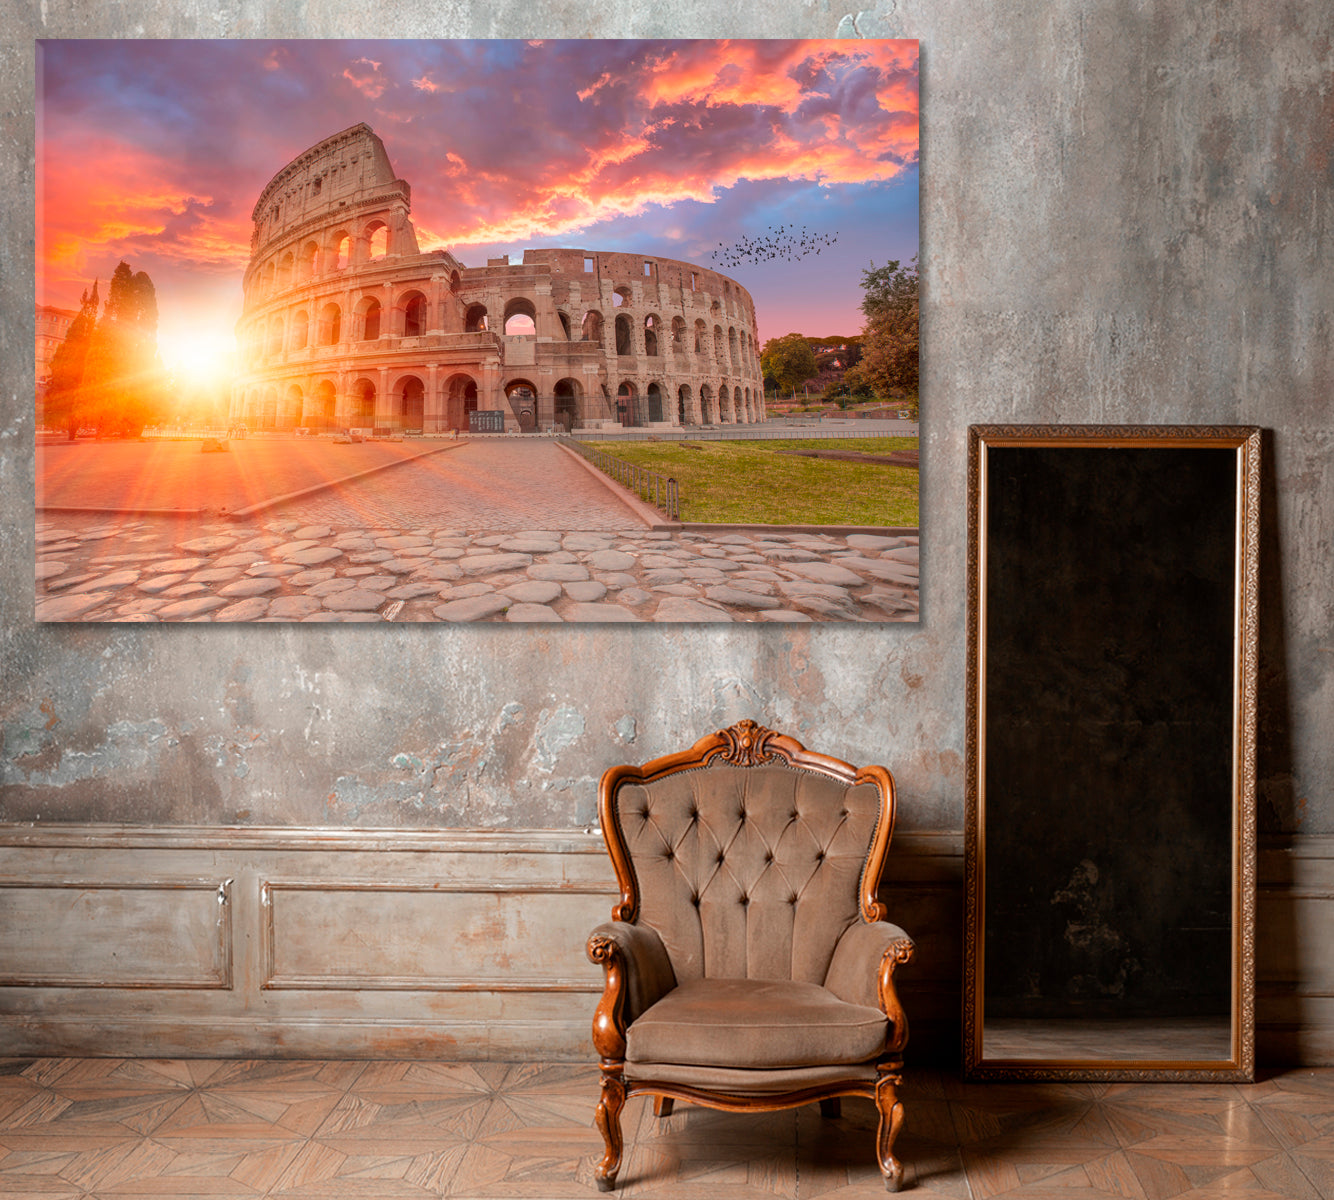 Colosseum Amphitheater Rome Italy Canvas Print ArtLexy 1 Panel 24"x16" inches 